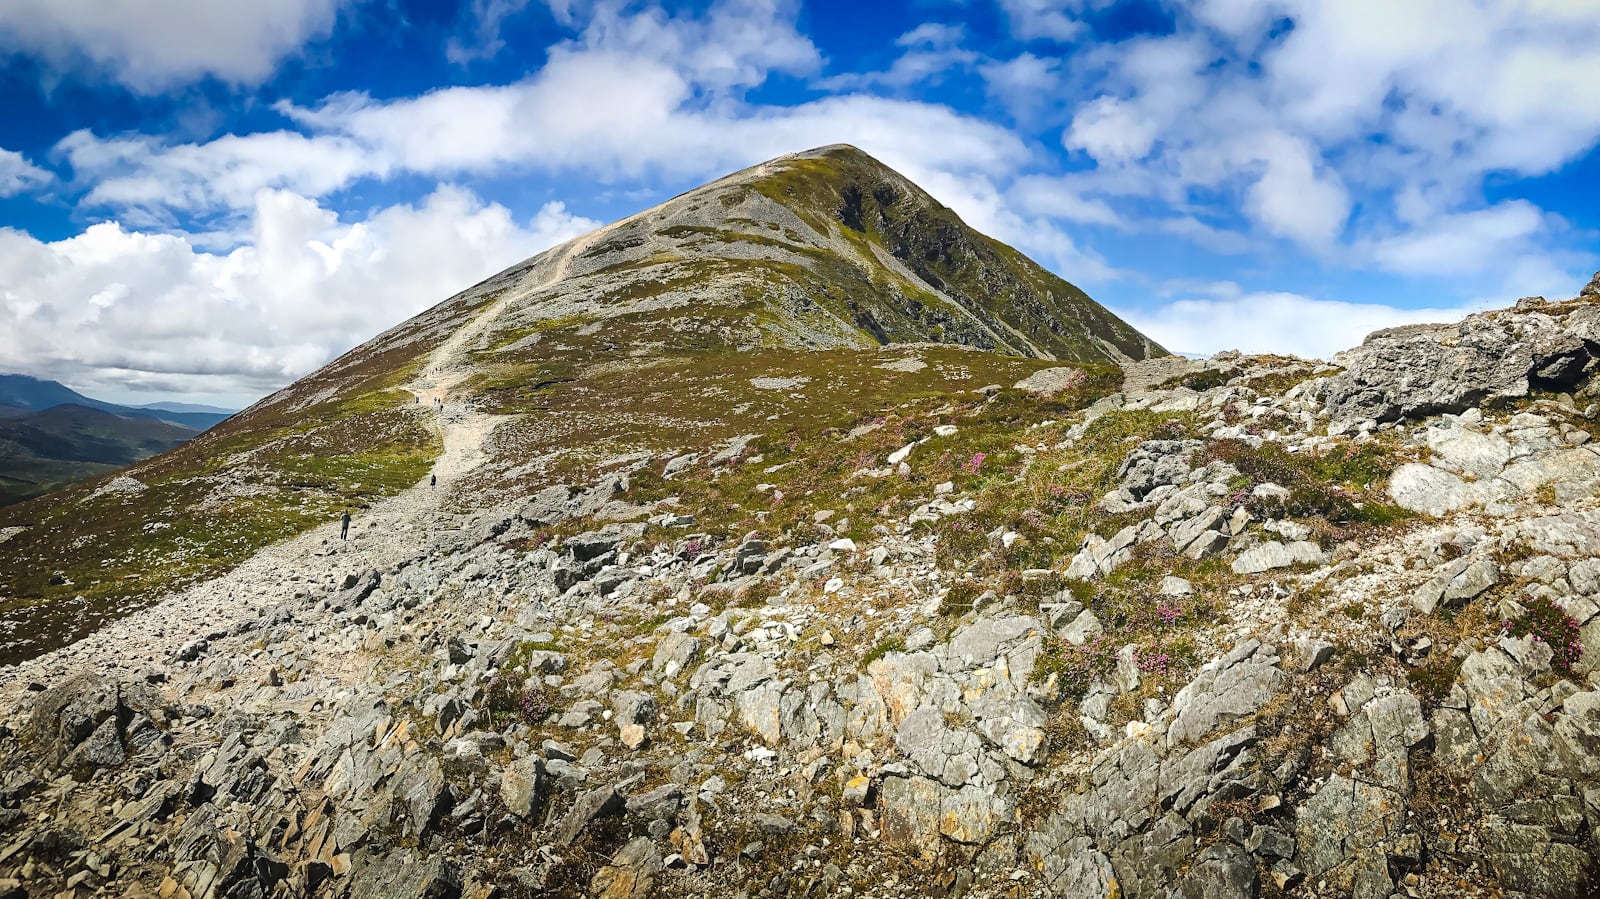 The summit of Croagh Patrick seen from its main hiking trail